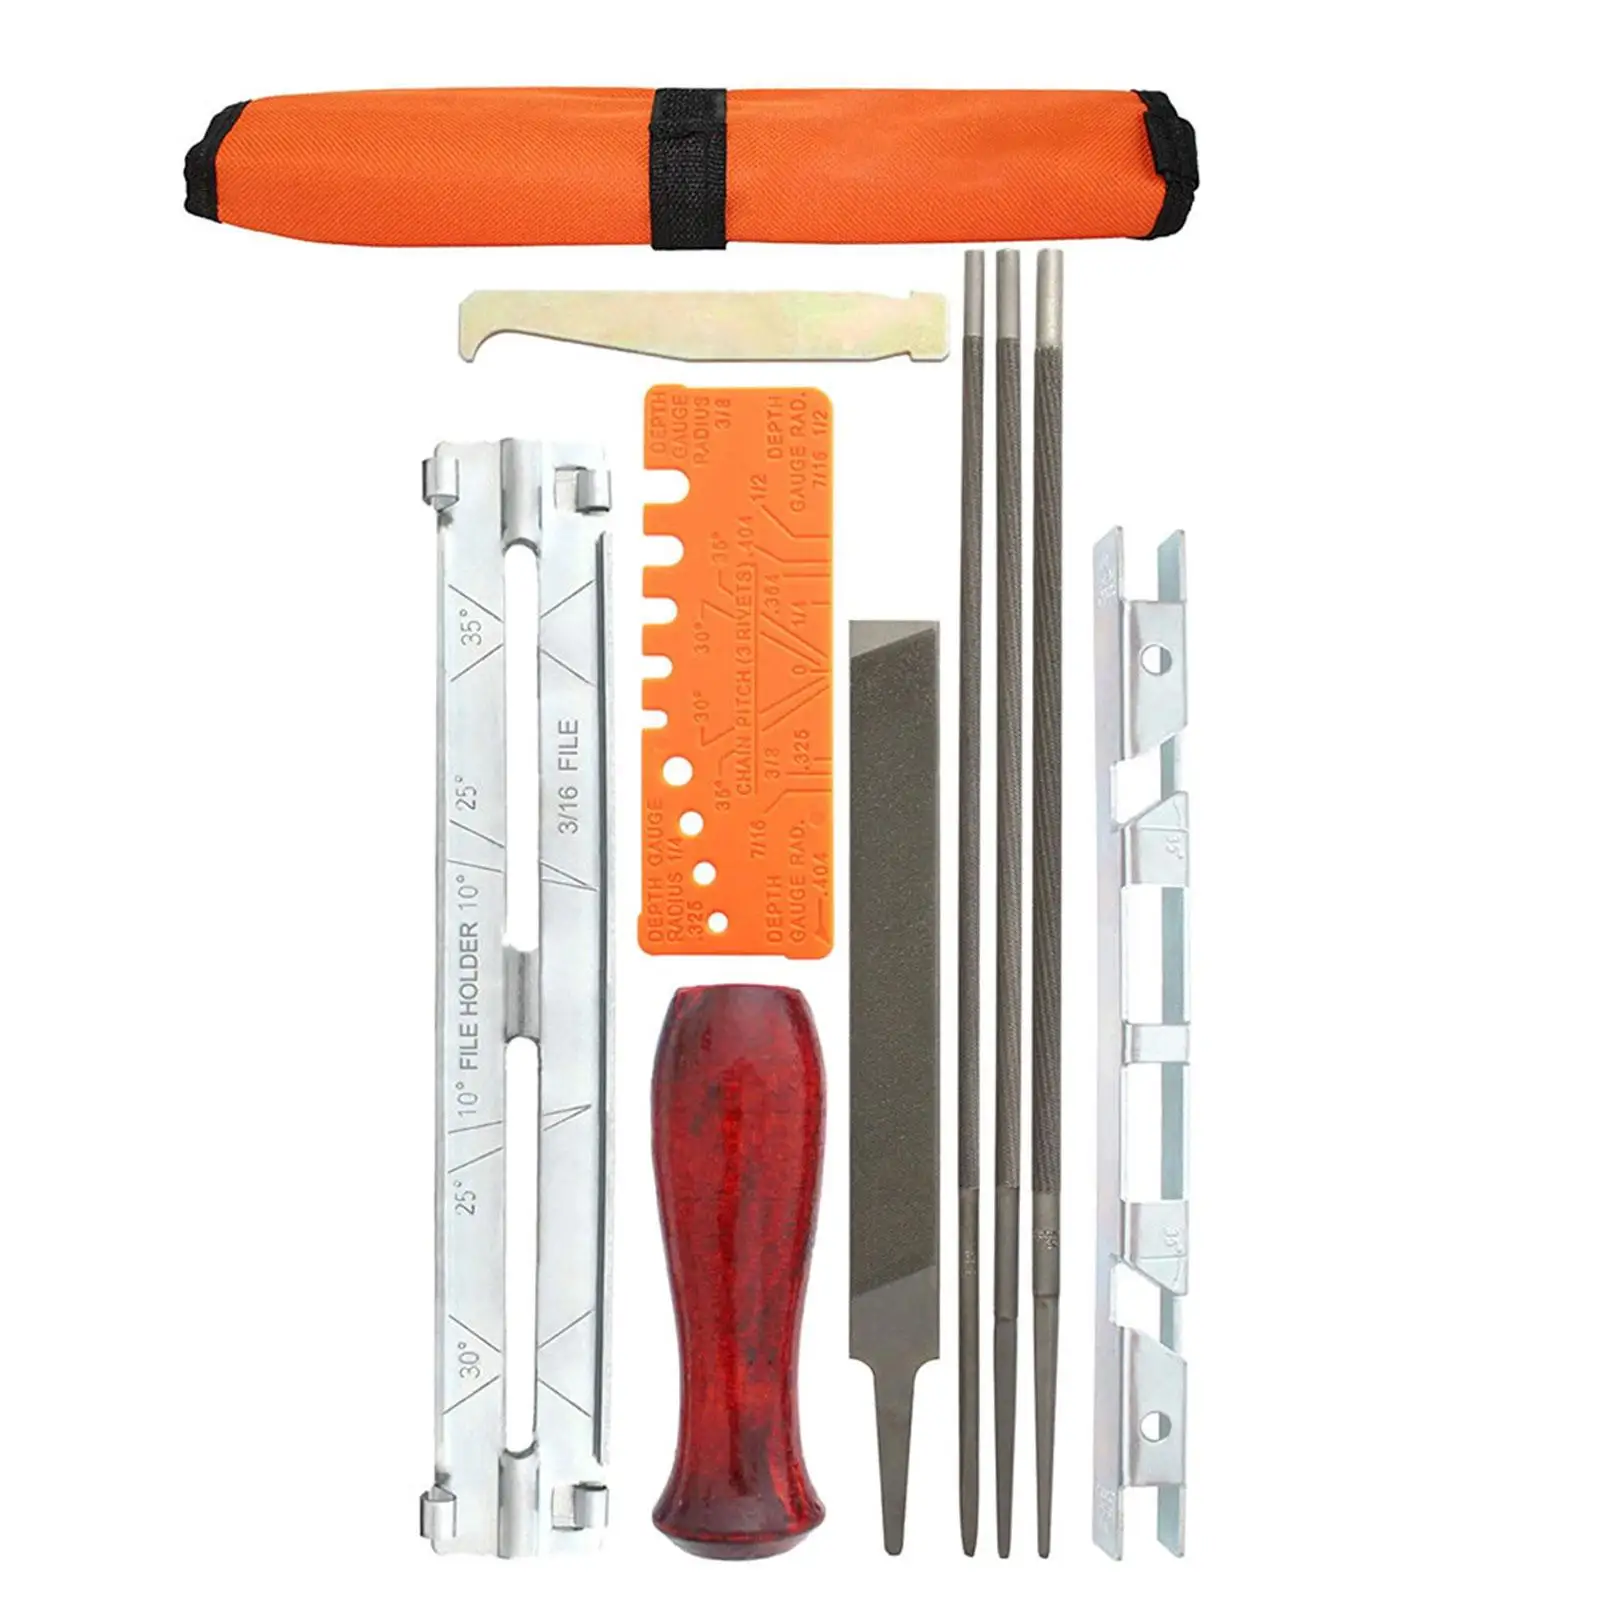 10 Pieces Chainsaw Sharpener File Set Contains 5/32